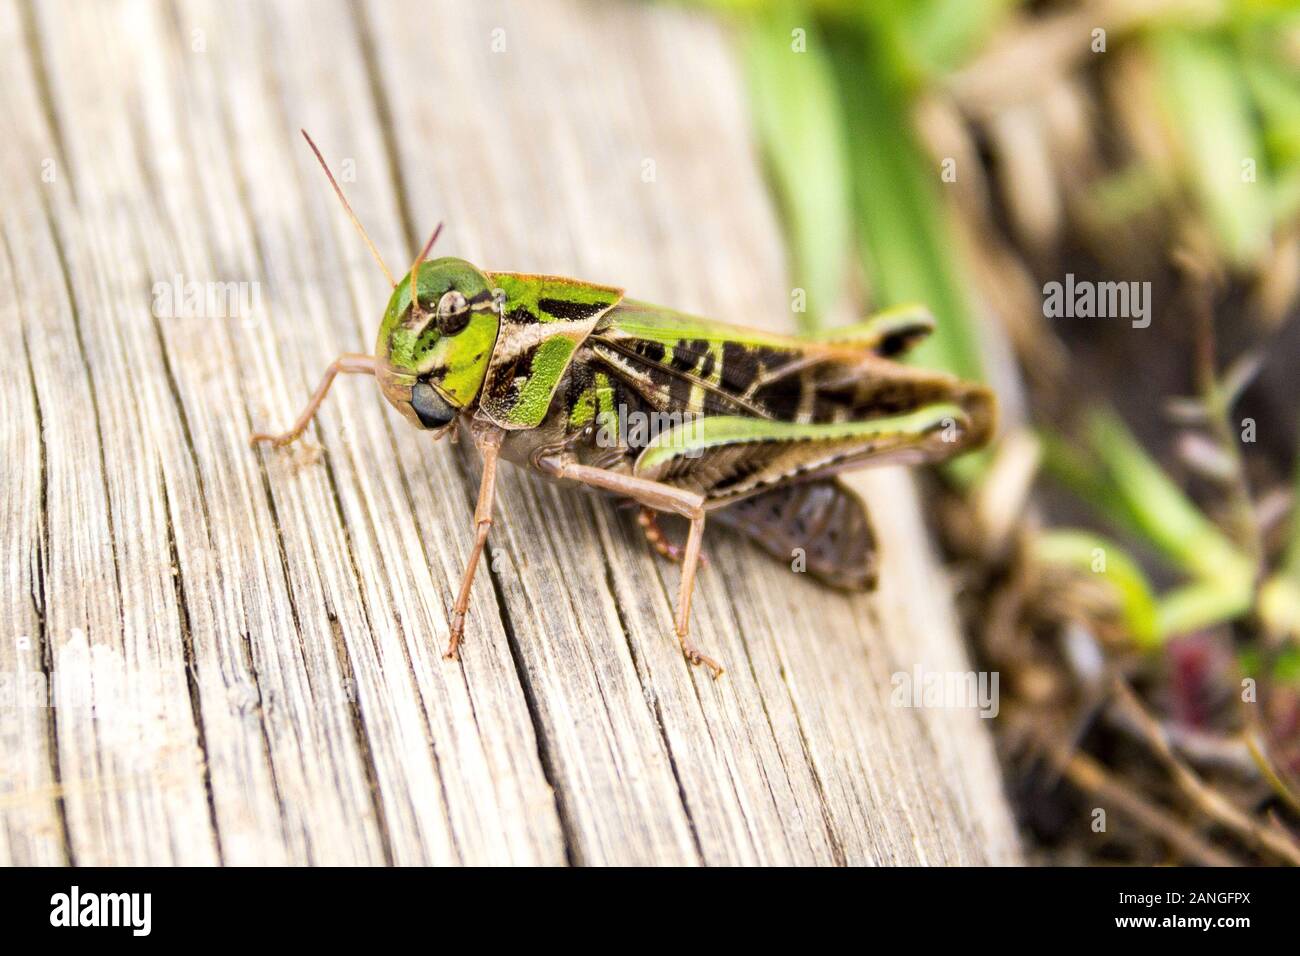 Close up of a green-brown grasshopper sitting on a piece of wood, Drakensberg, South Africa Stock Photo